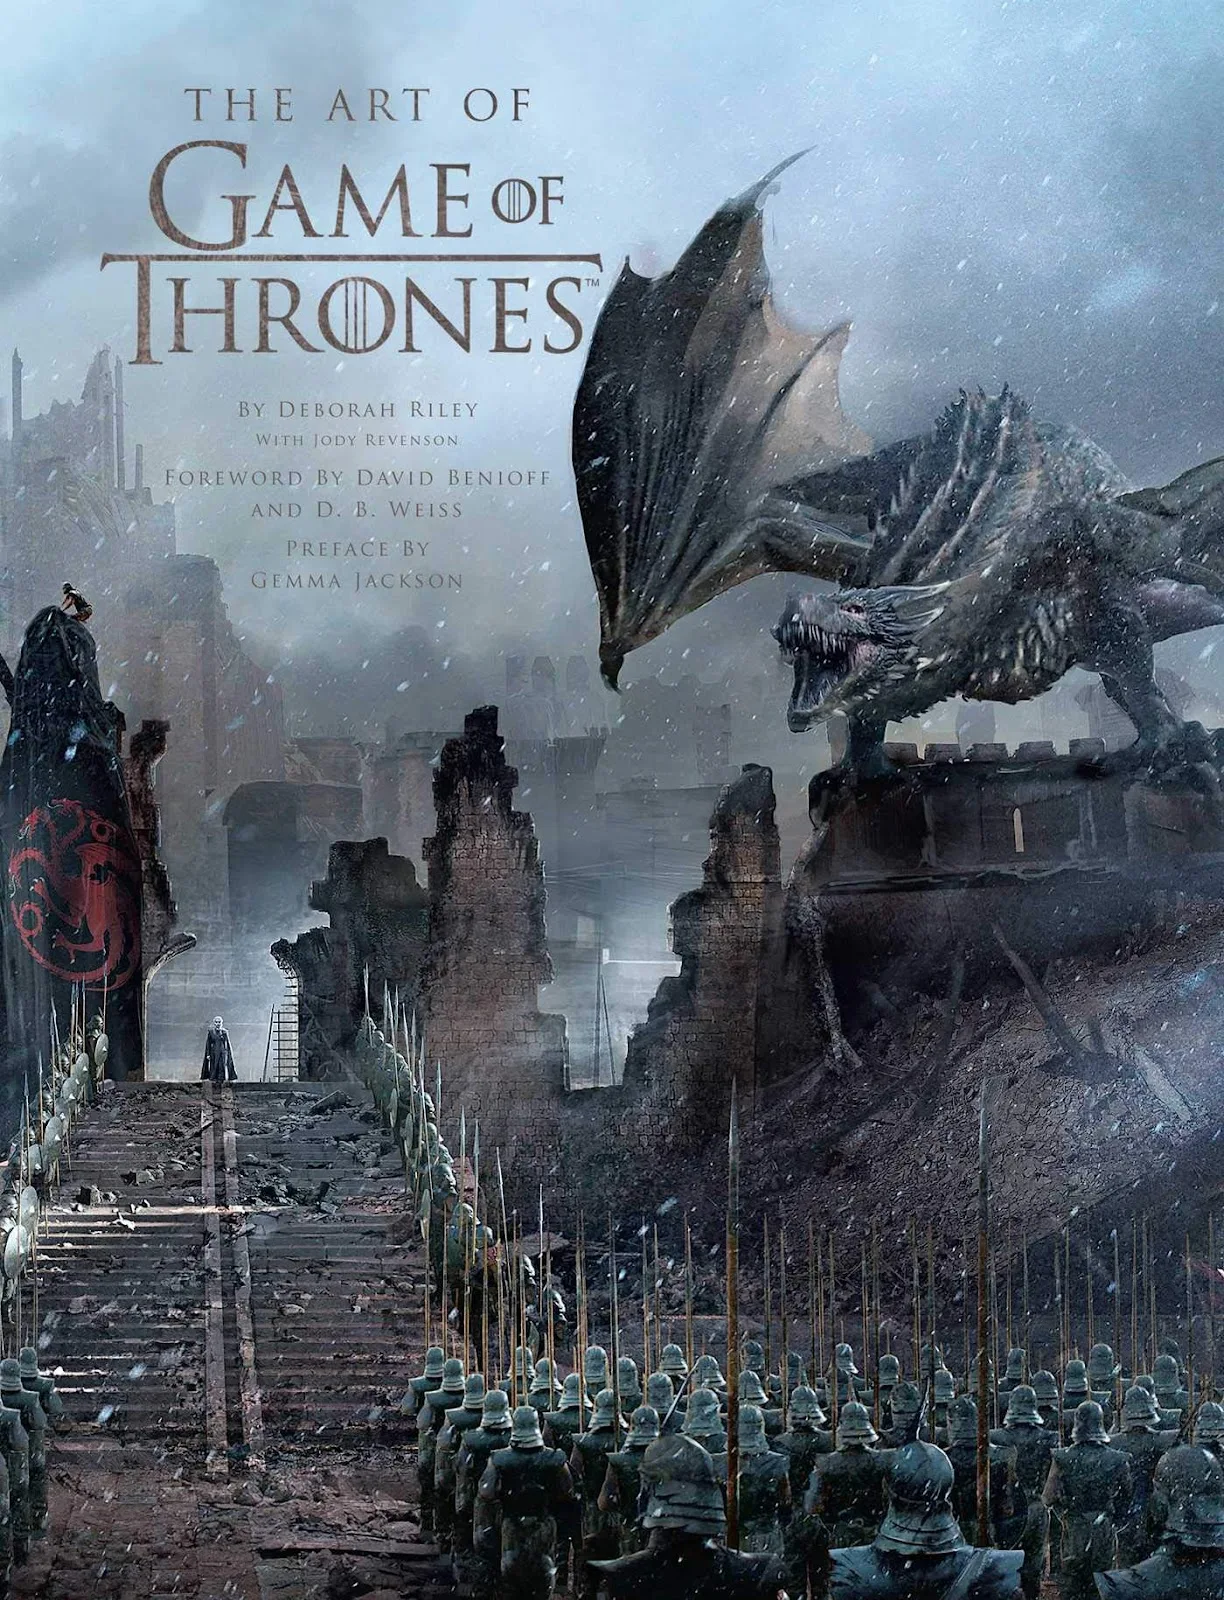 Game of Thrones illustrated cover depicting characters and landscapes